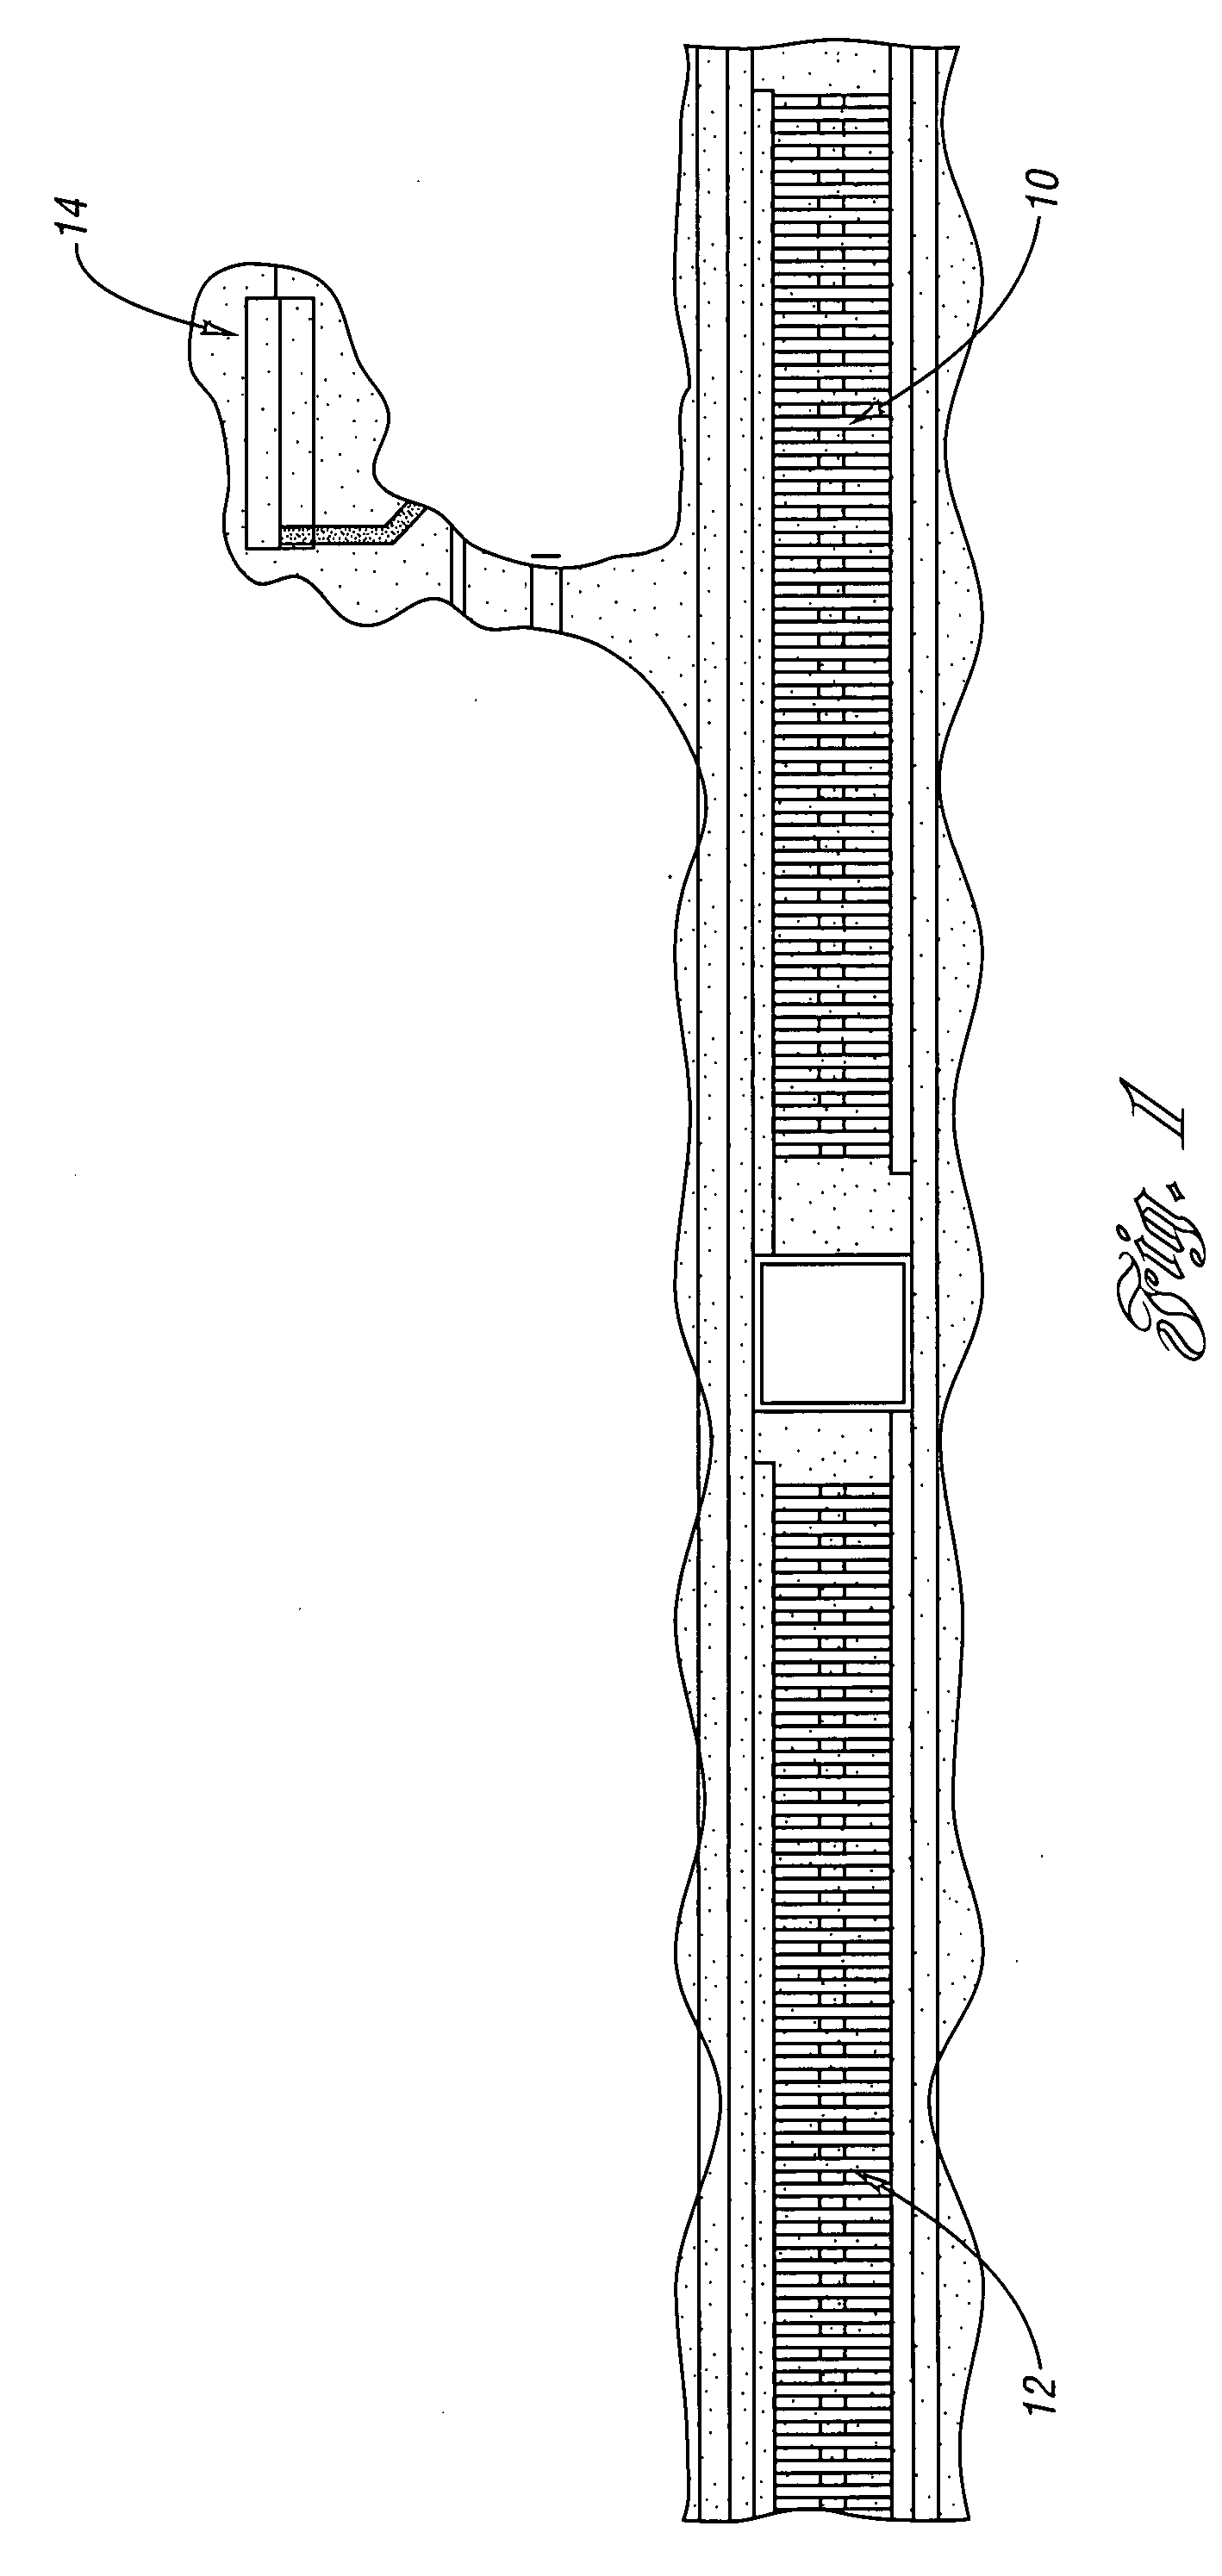 Method and system for laser processing targets of different types on a workpiece